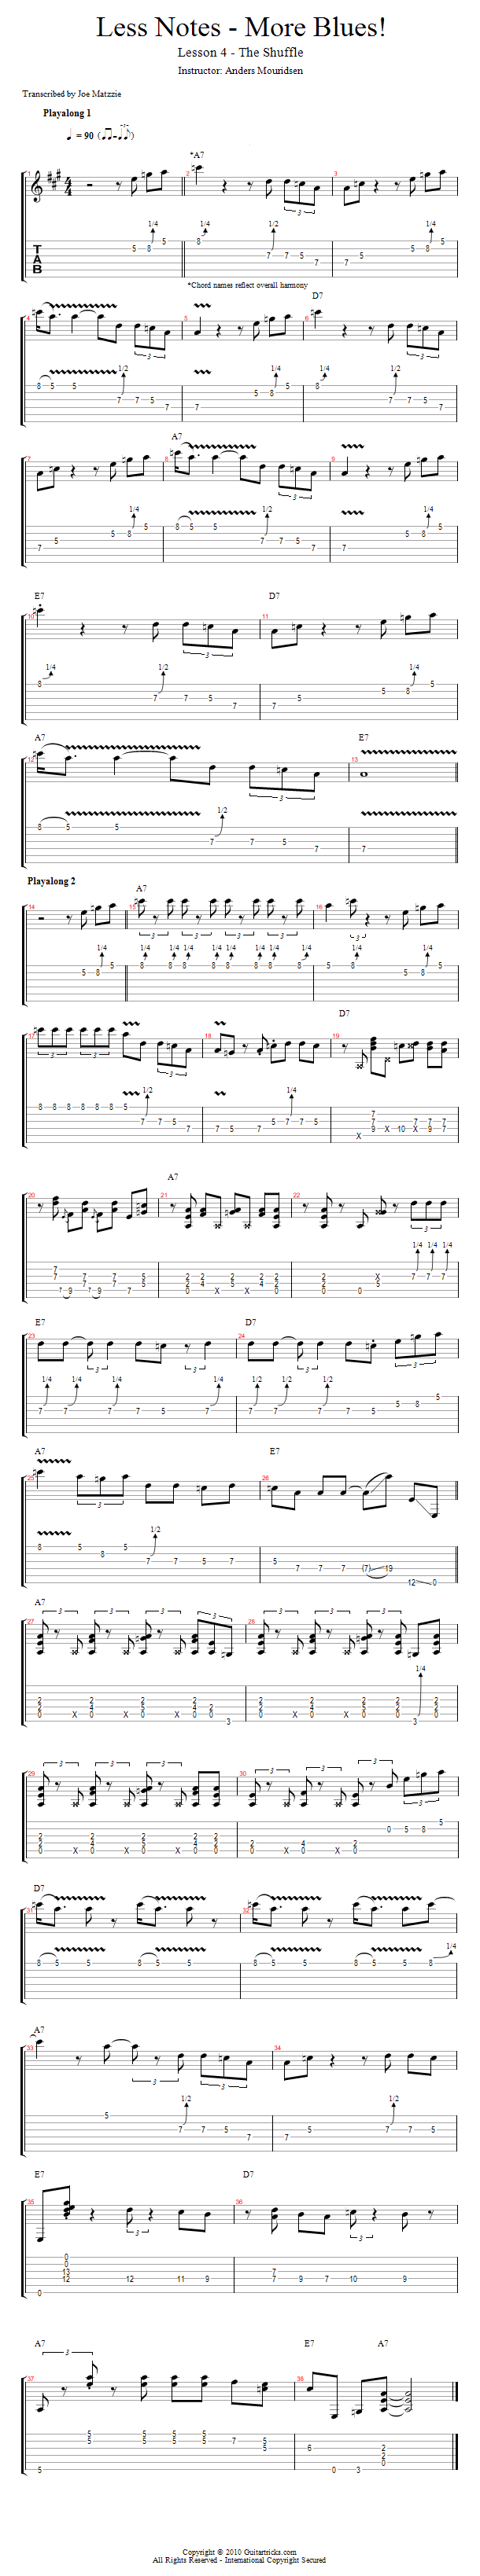 The Shuffle song notation